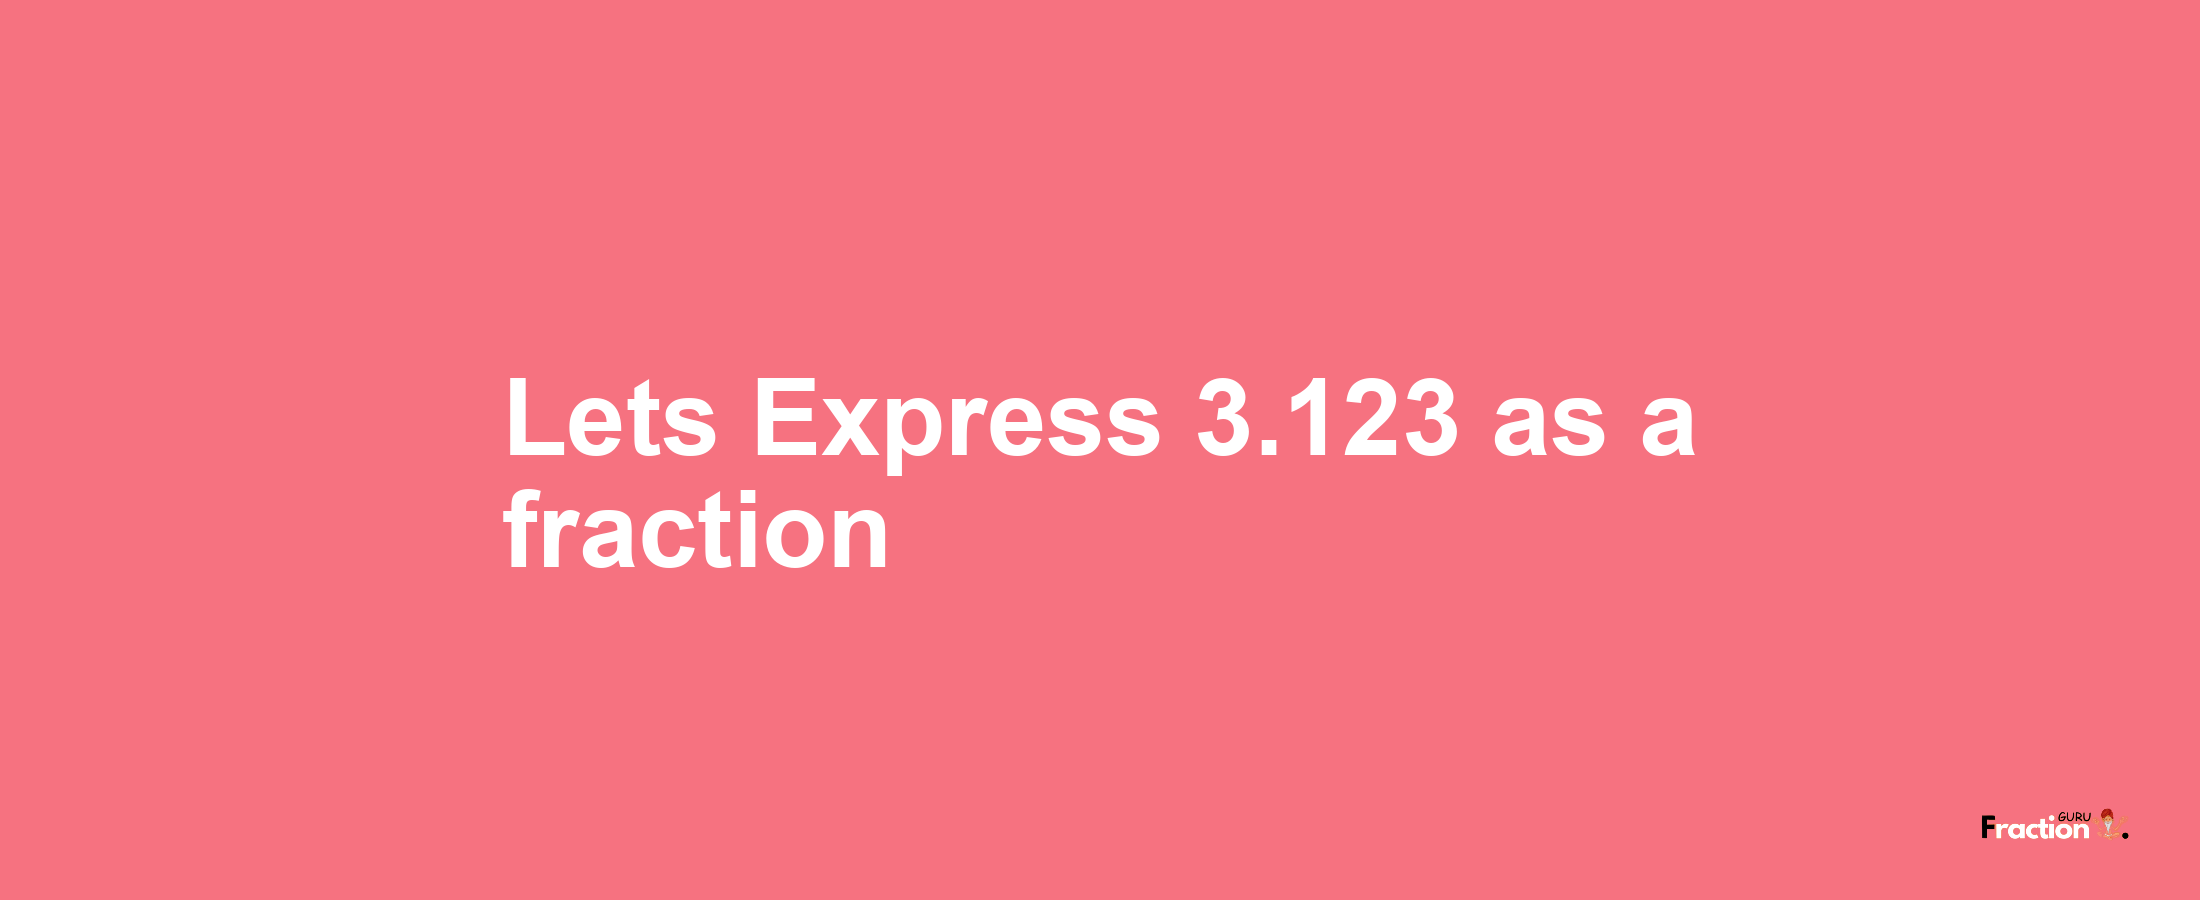 Lets Express 3.123 as afraction